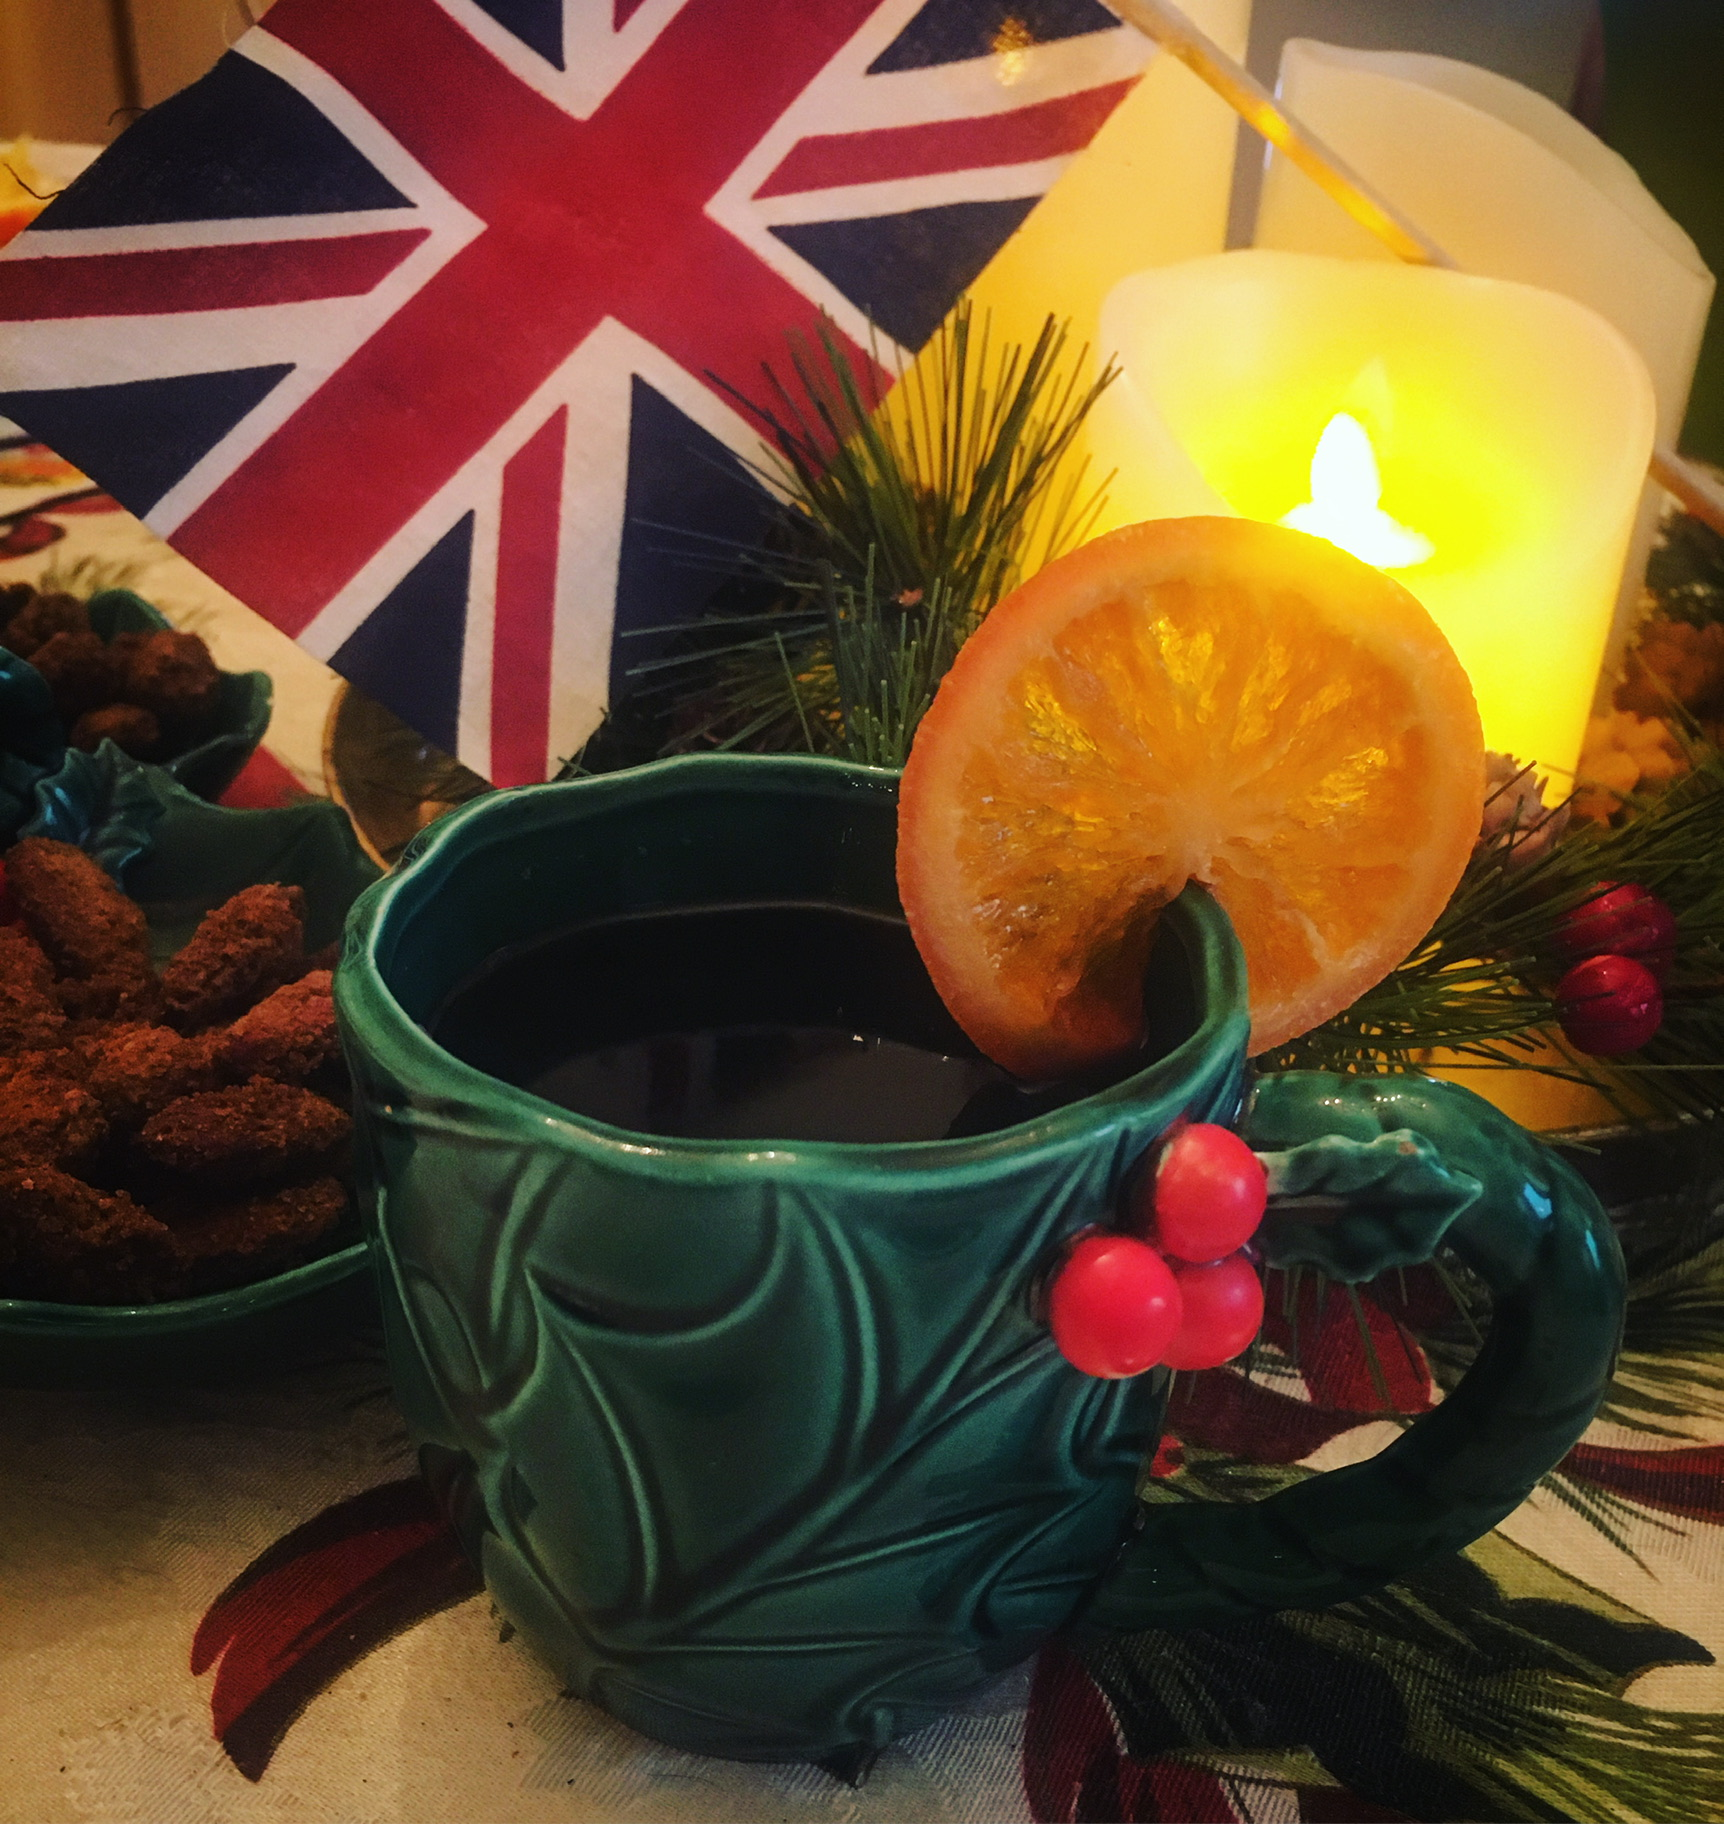 A green holly-design mug filled with a warm, wintry beverage, with the British flag, candles, and other Christmas decorations behind it.